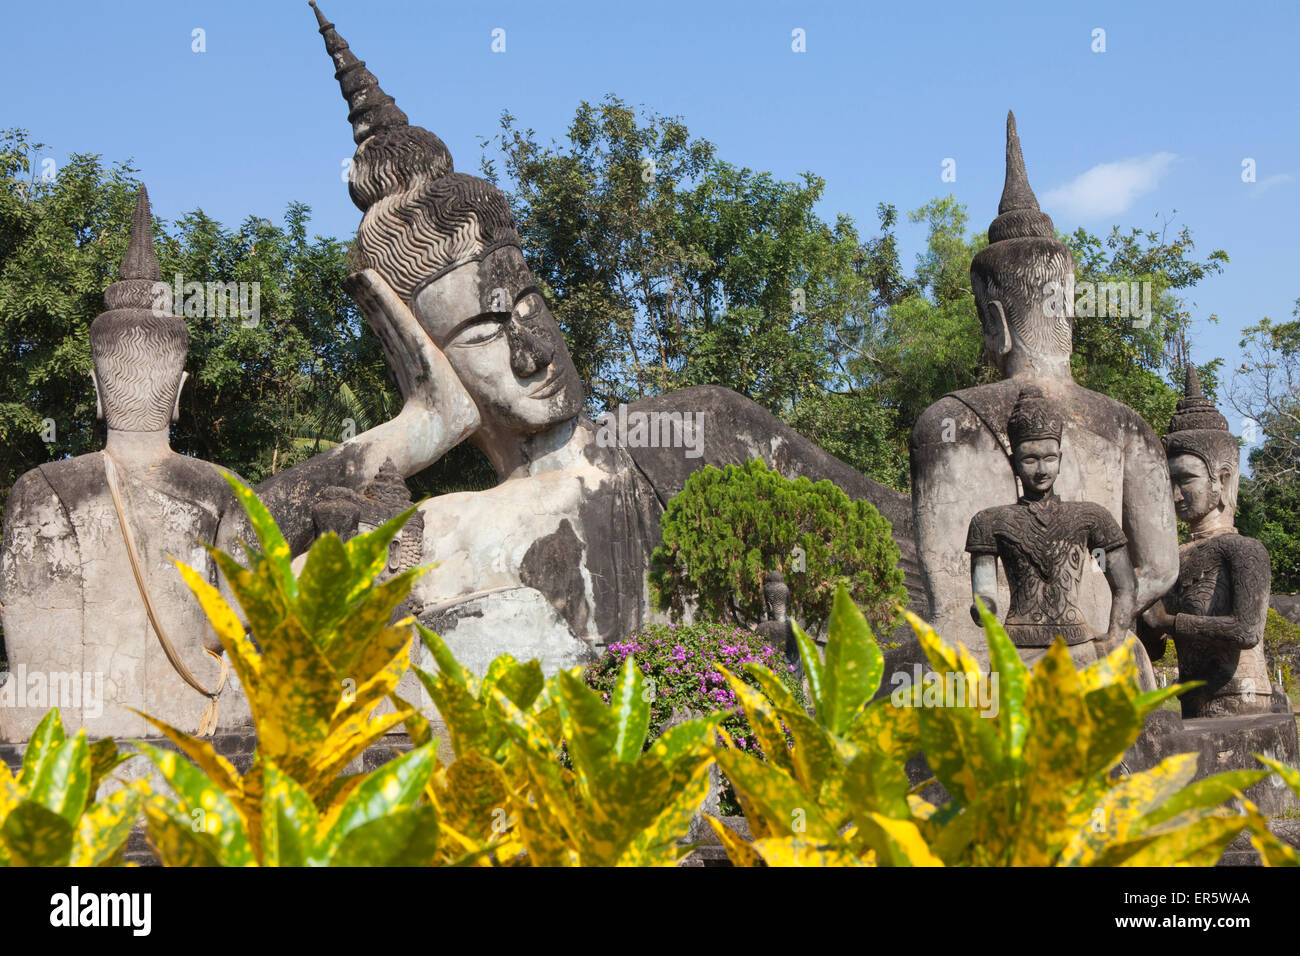 Buddhistic sculptures in Xieng Khuan Buddha Park in Vientiane, capital of Laos, Asia Stock Photo